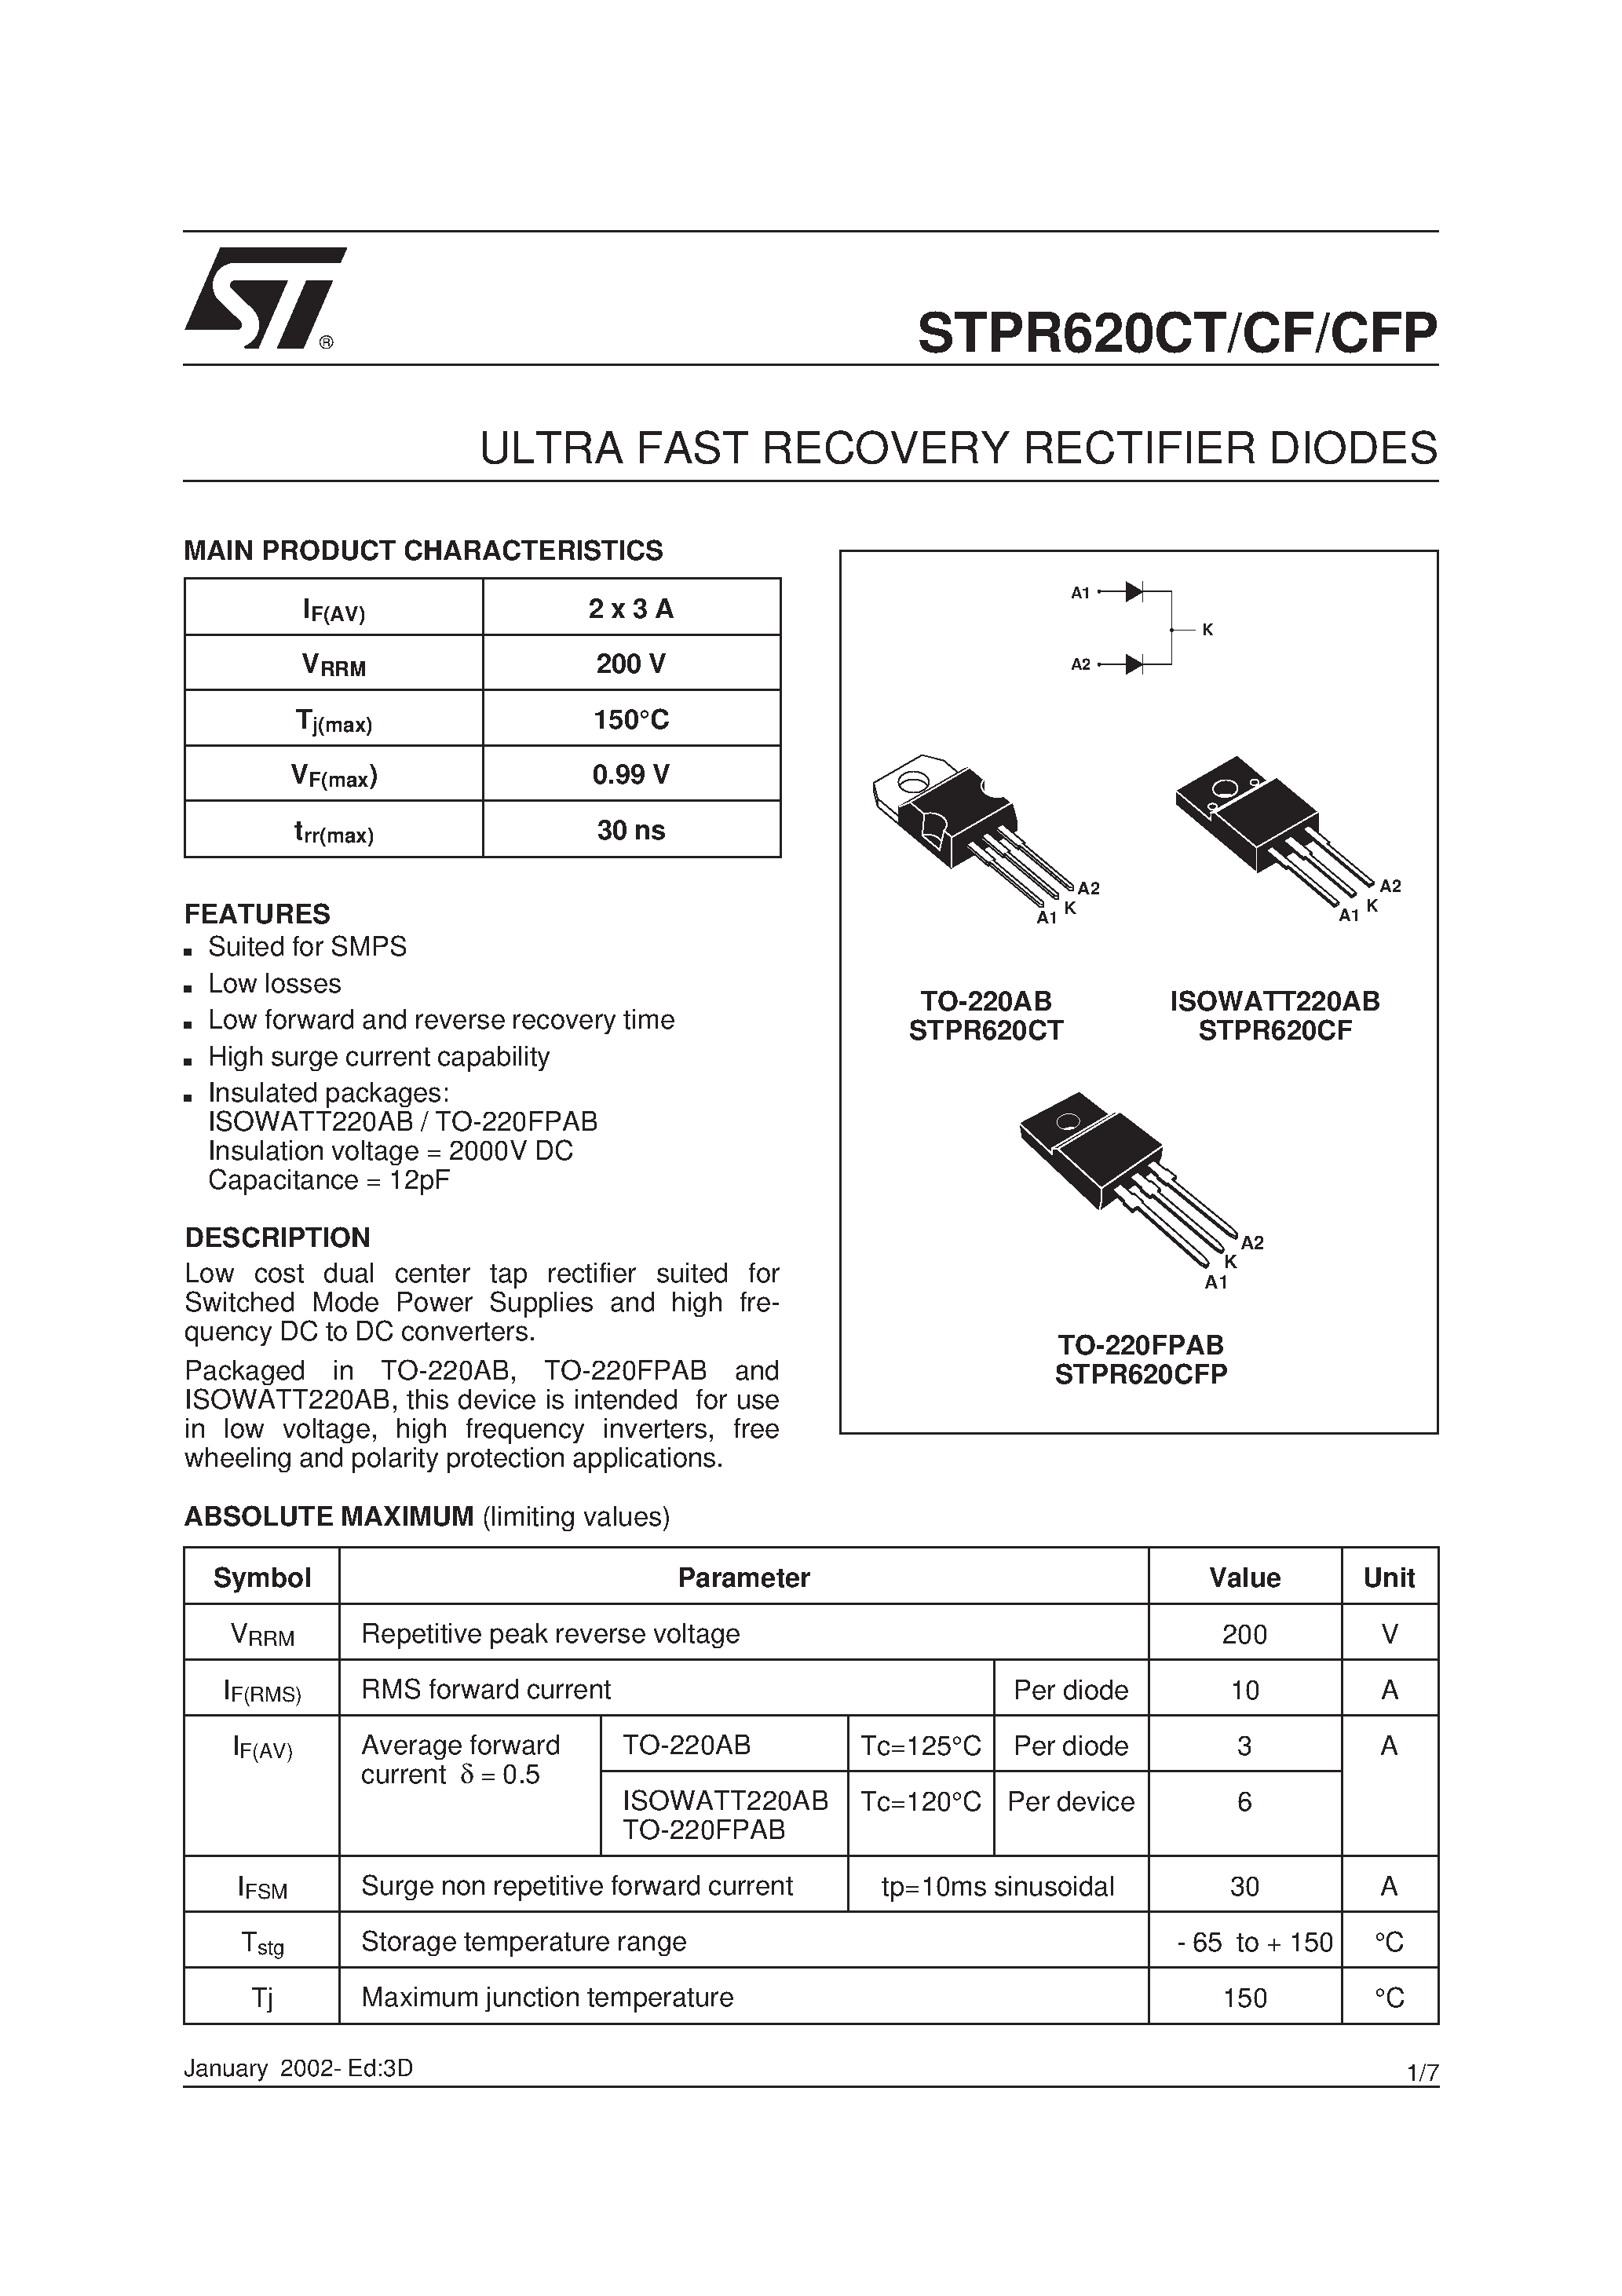 Datasheet STPR620C - ULTRA FAST RECOVERY RECTIFIER DIODES page 1